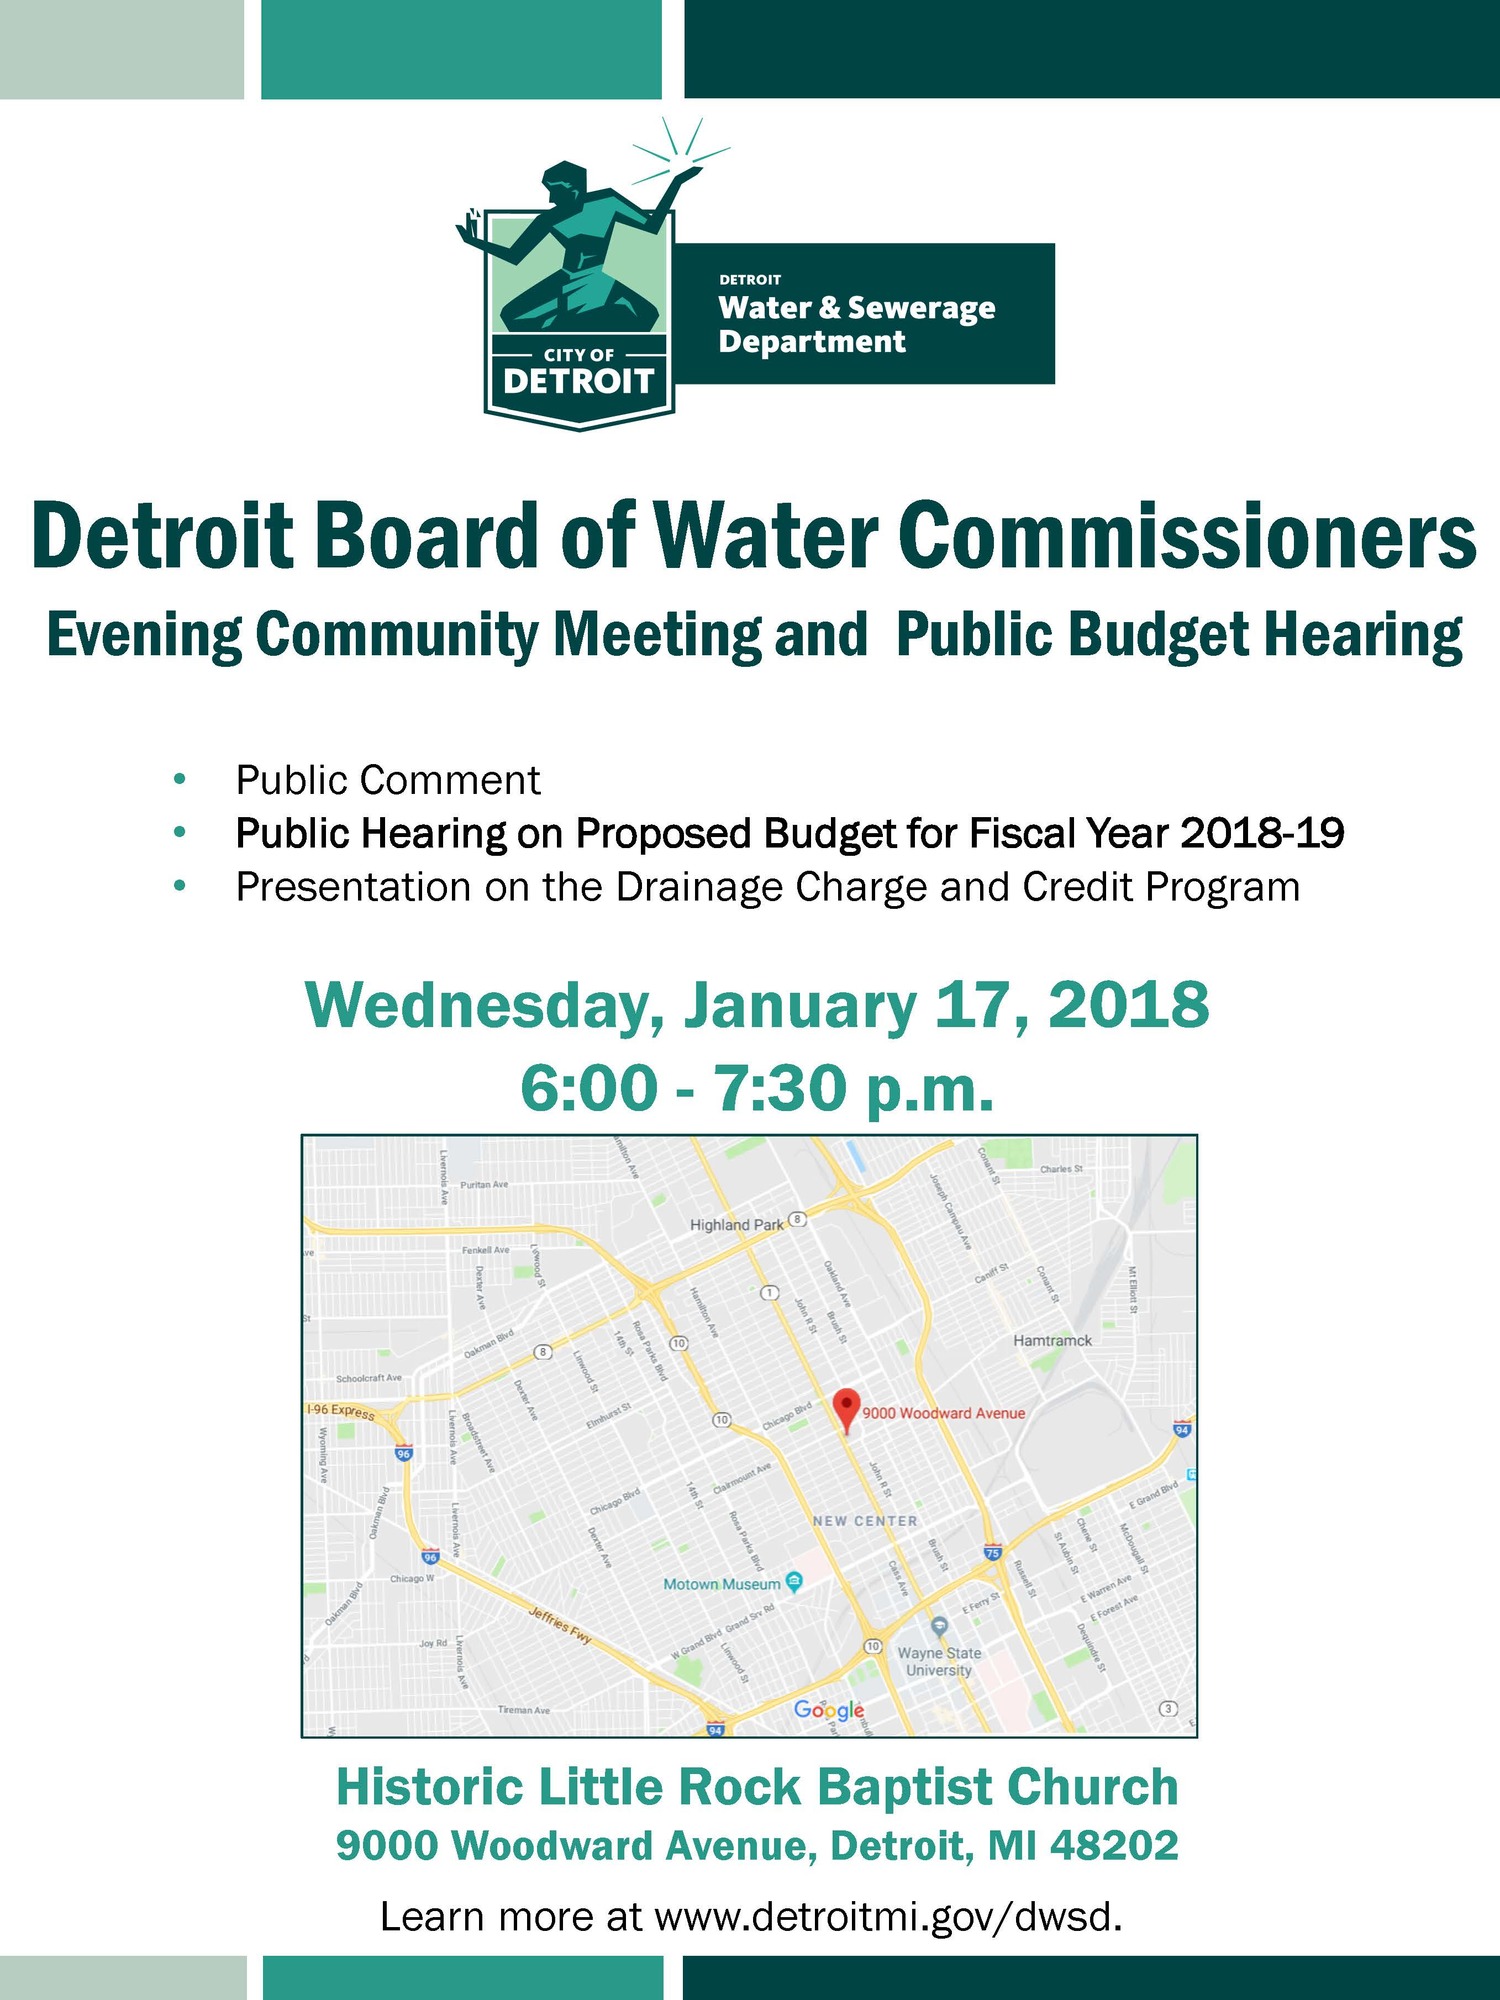 Board of Water Commissioners Evening Community Meeting and Public Budget Hearing - January 17, 2018